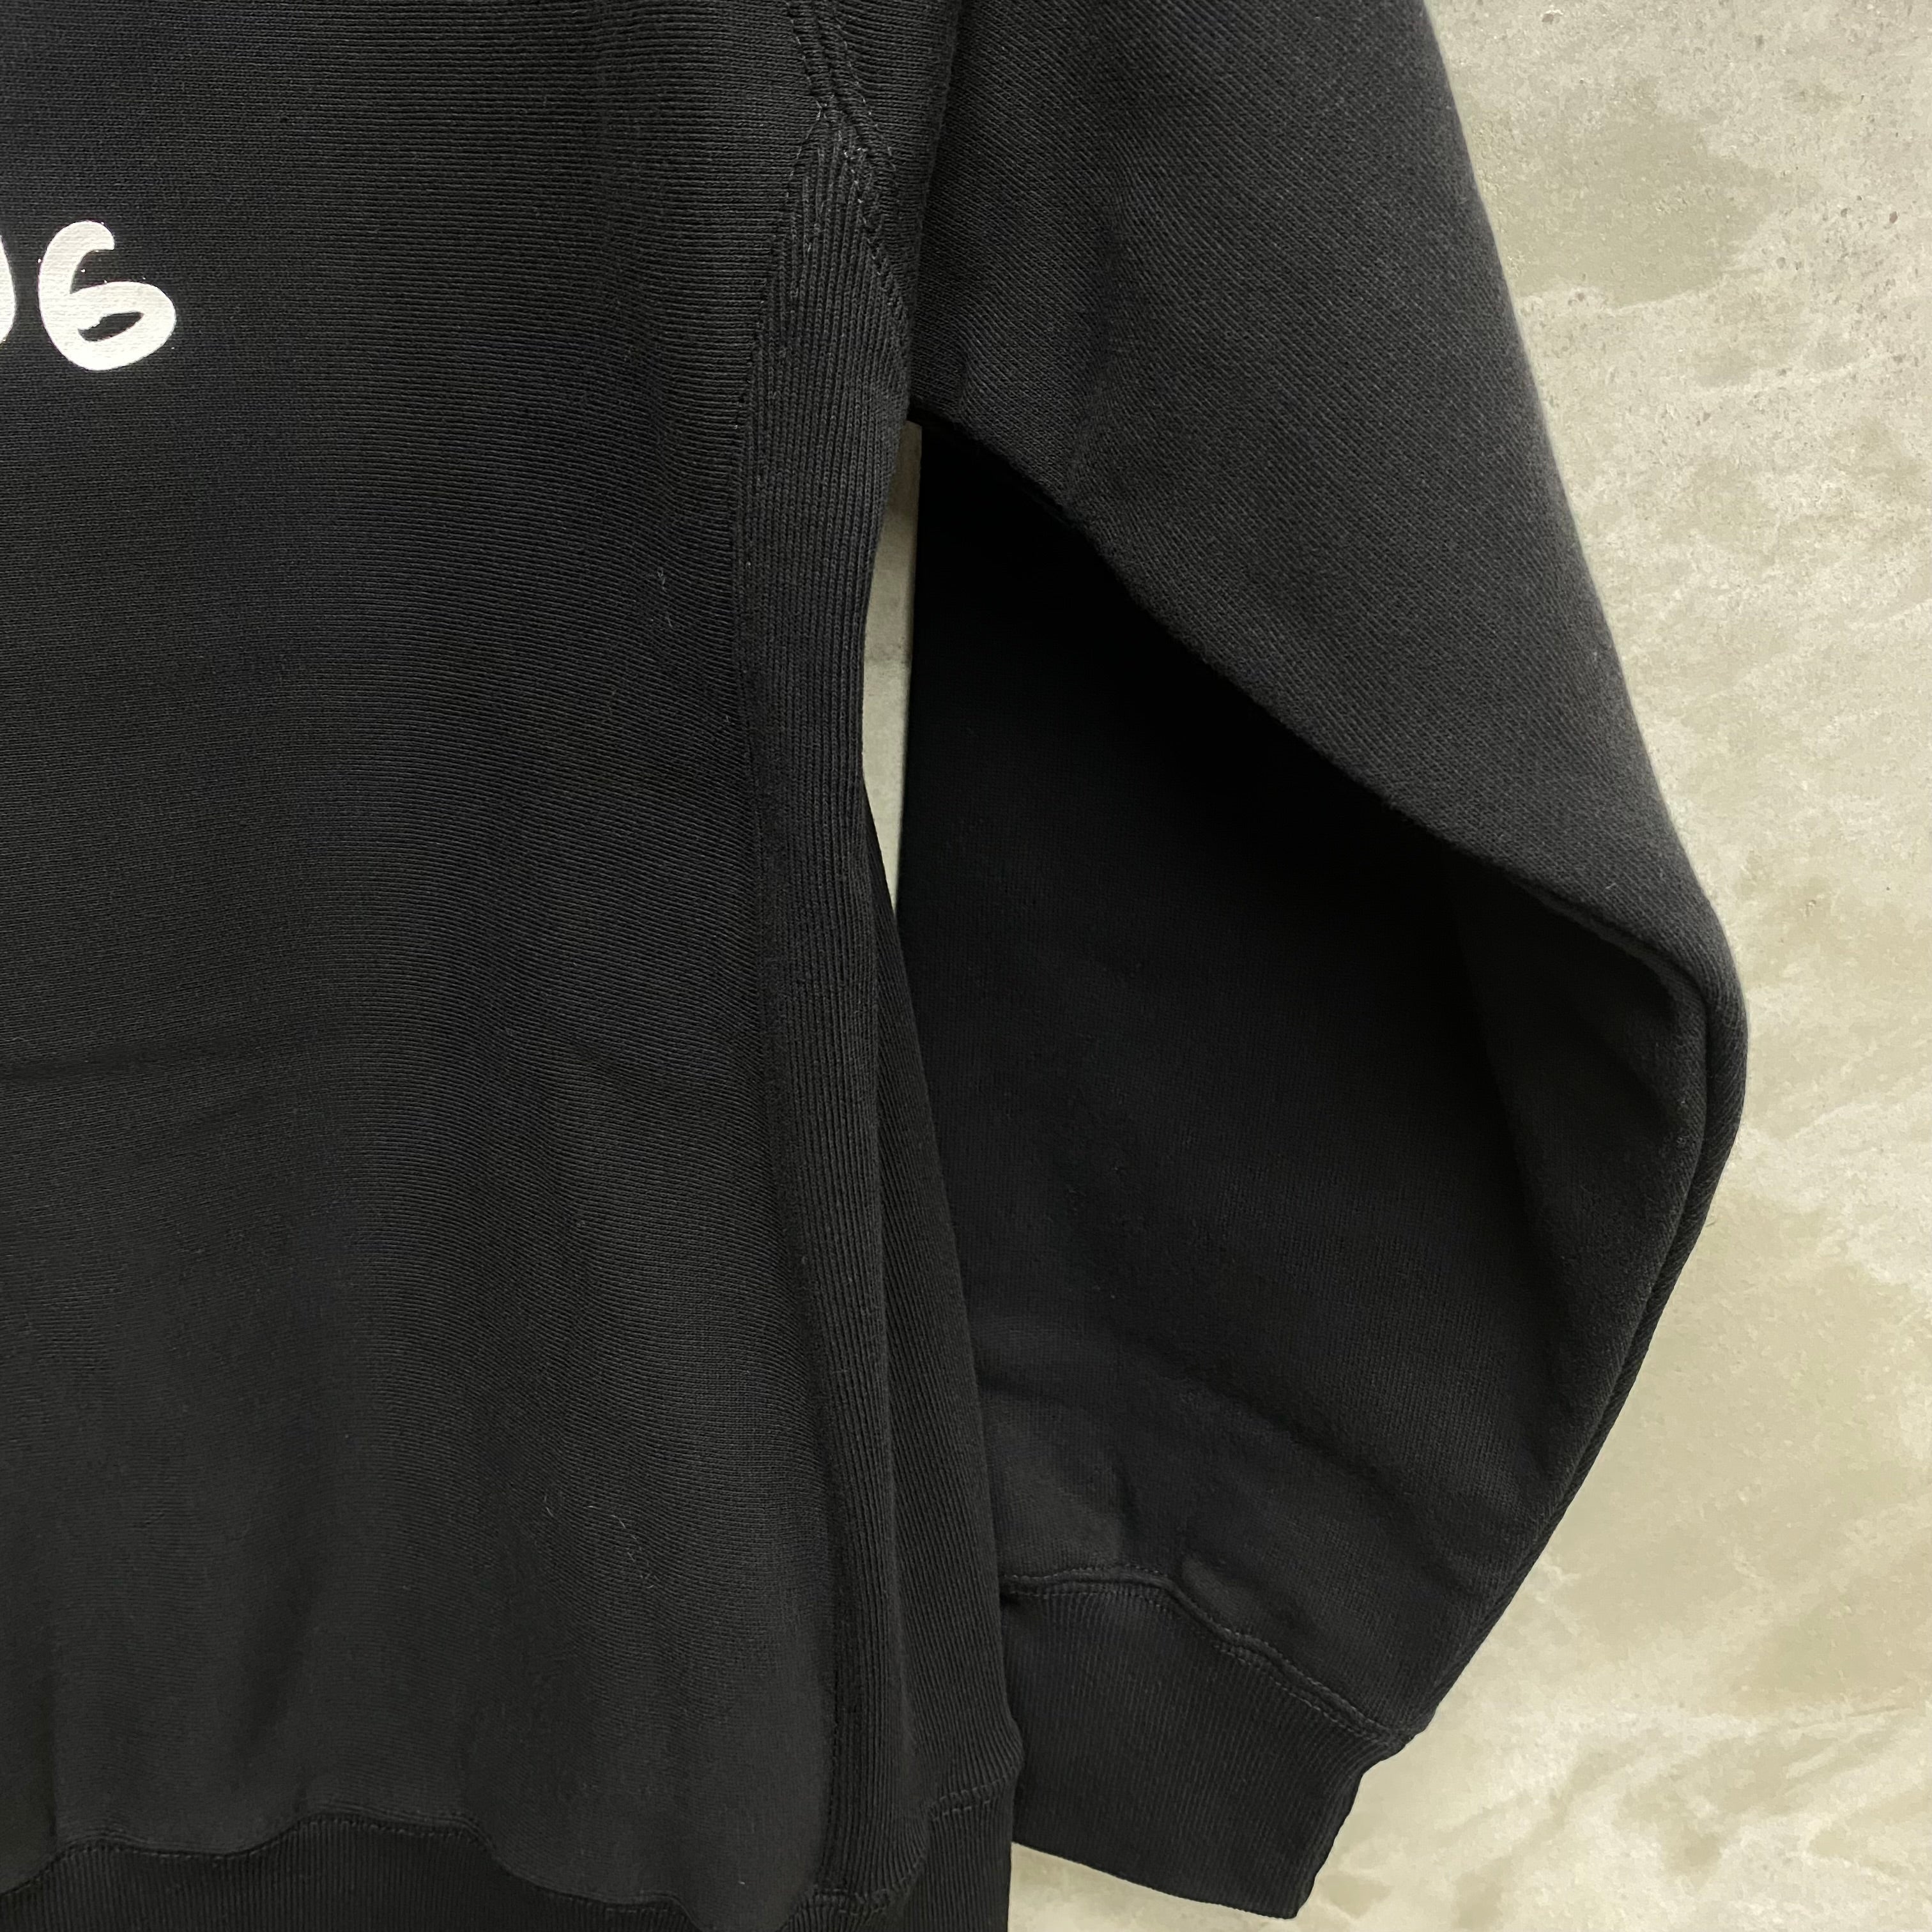 [ FINAL ONE ! ] Do Nothing Congress PULL OVER HOODIE  DNC x Thomas Lelu Pull " DO EVERYTHING " / Do Nothing Congress